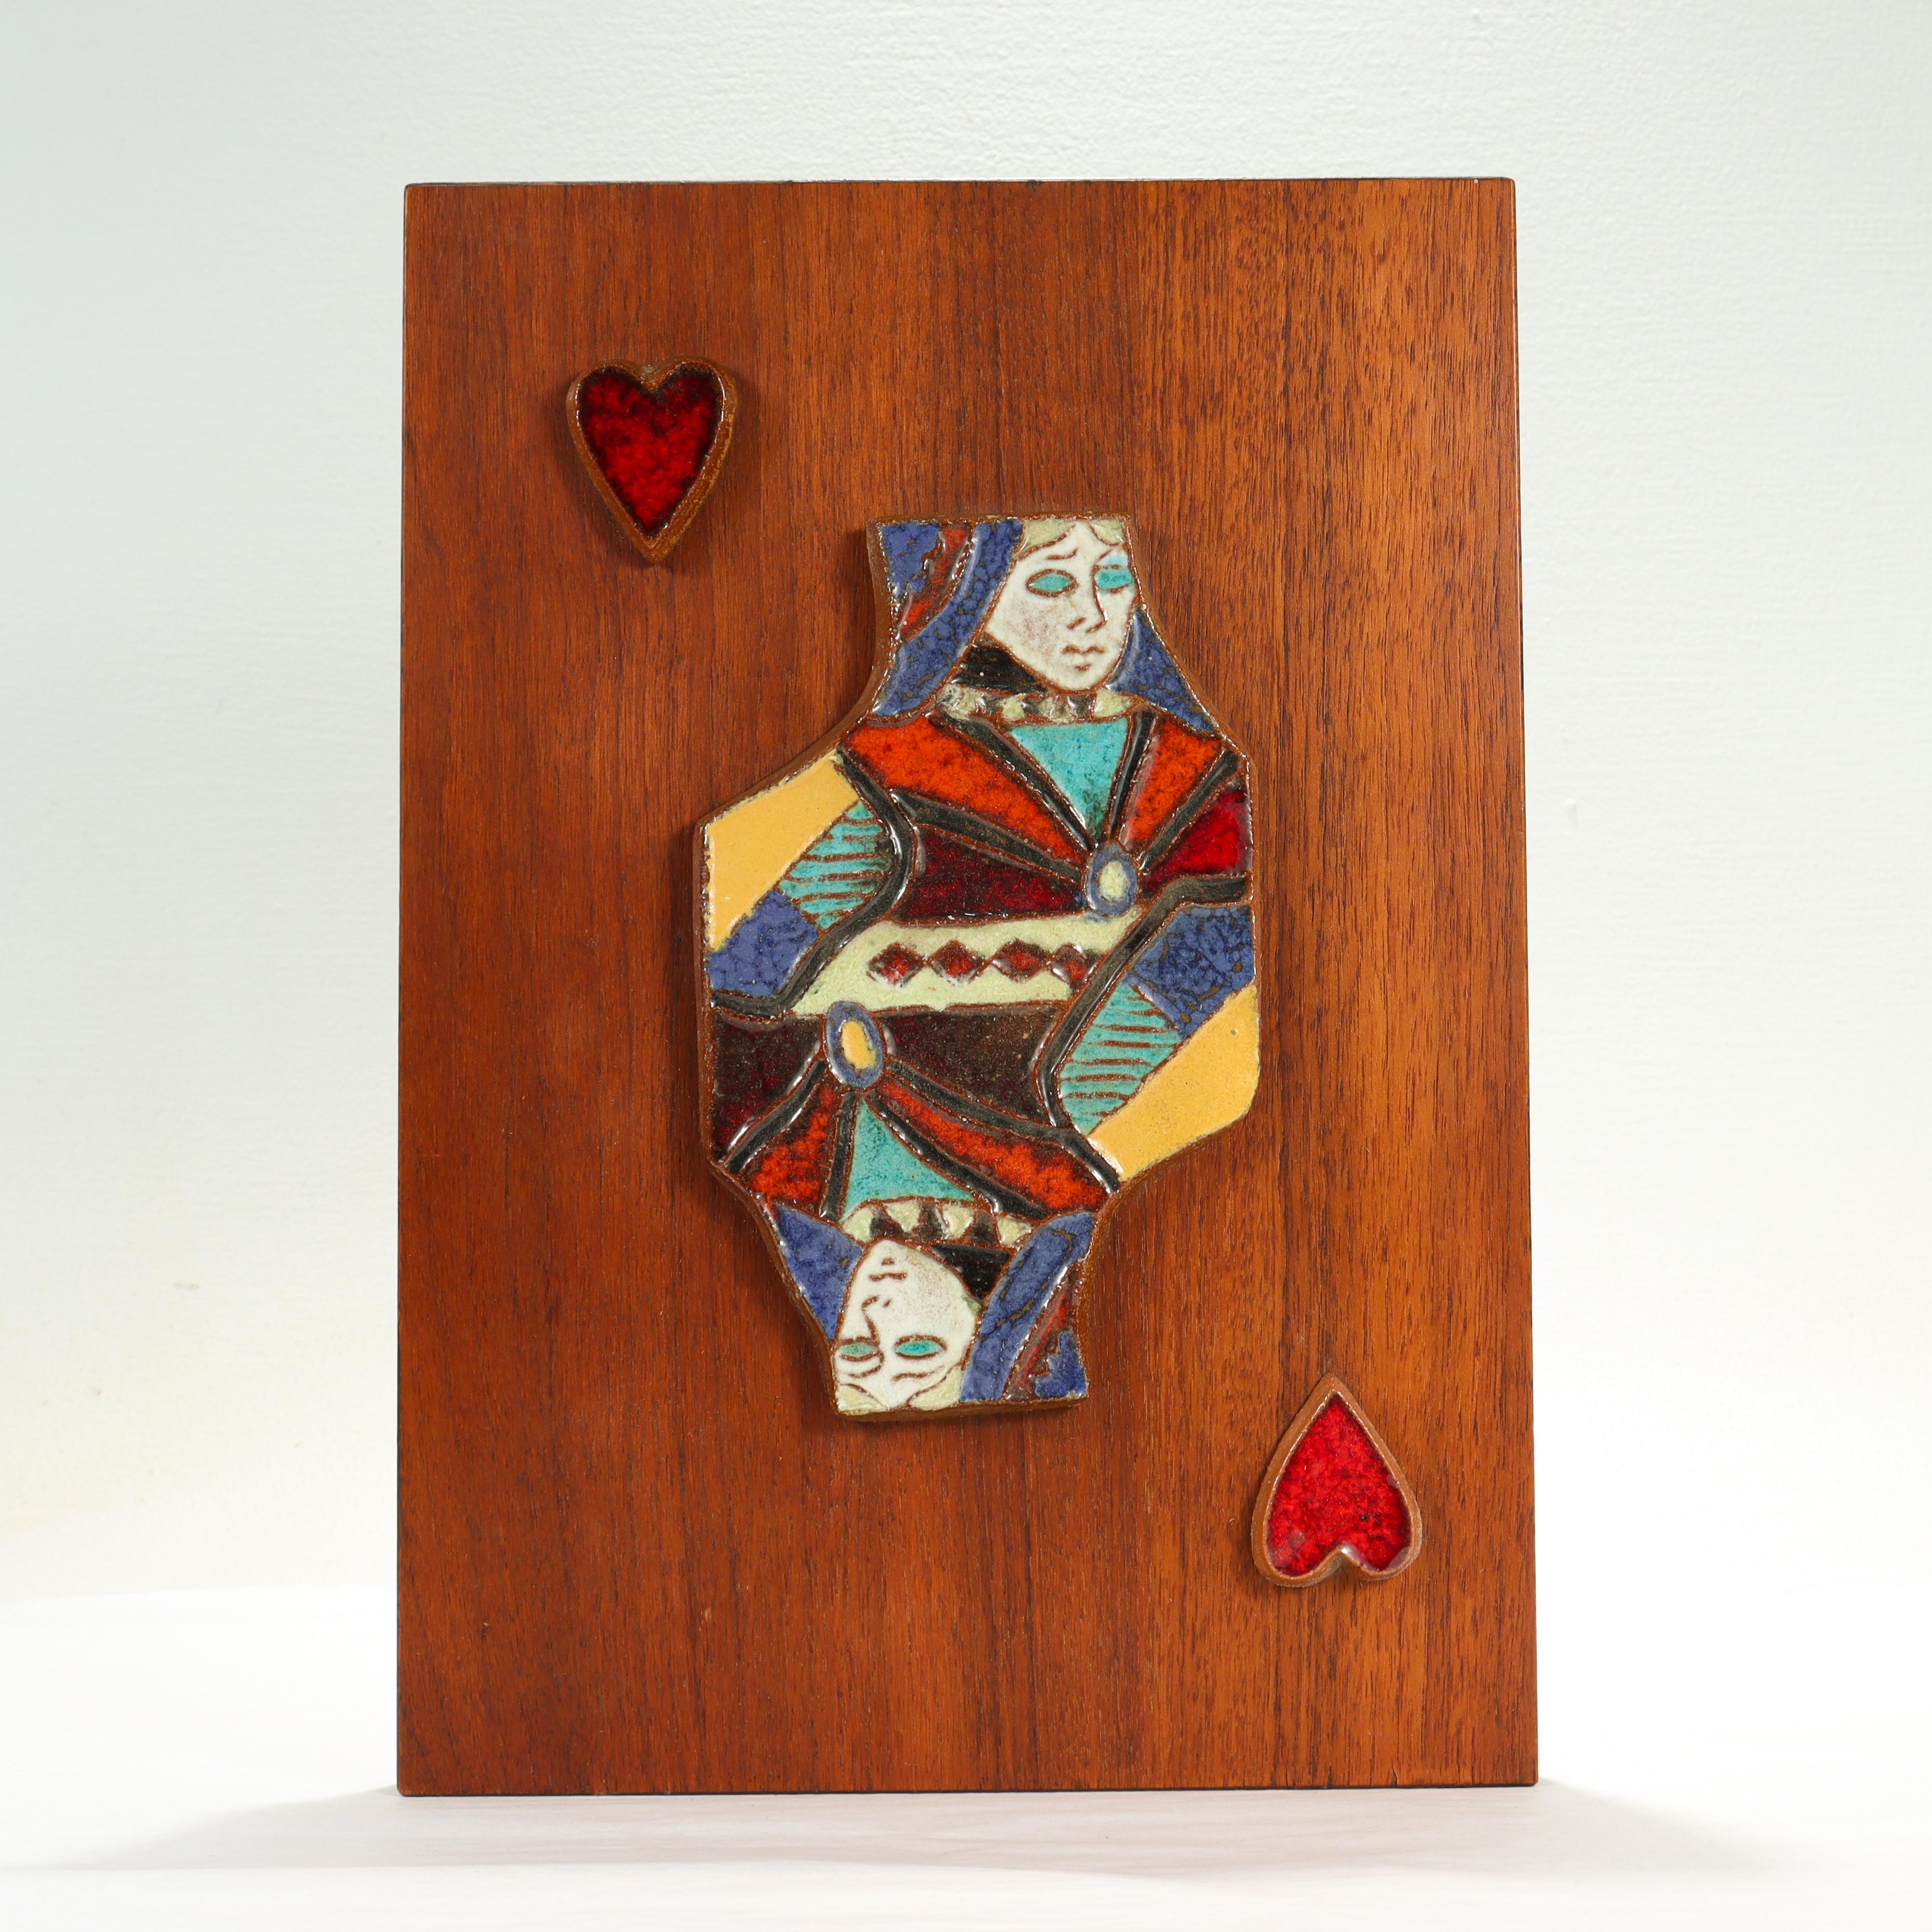 A fine Mid-Century Modern pottery tile.

By Harris Strong. 

With a terracotta pottery tile depicting the Queen of Hearts mounted on a teak veneered panel.

Simply a great piece for any mid-century room!

Date:
Mid-20th century

Overall